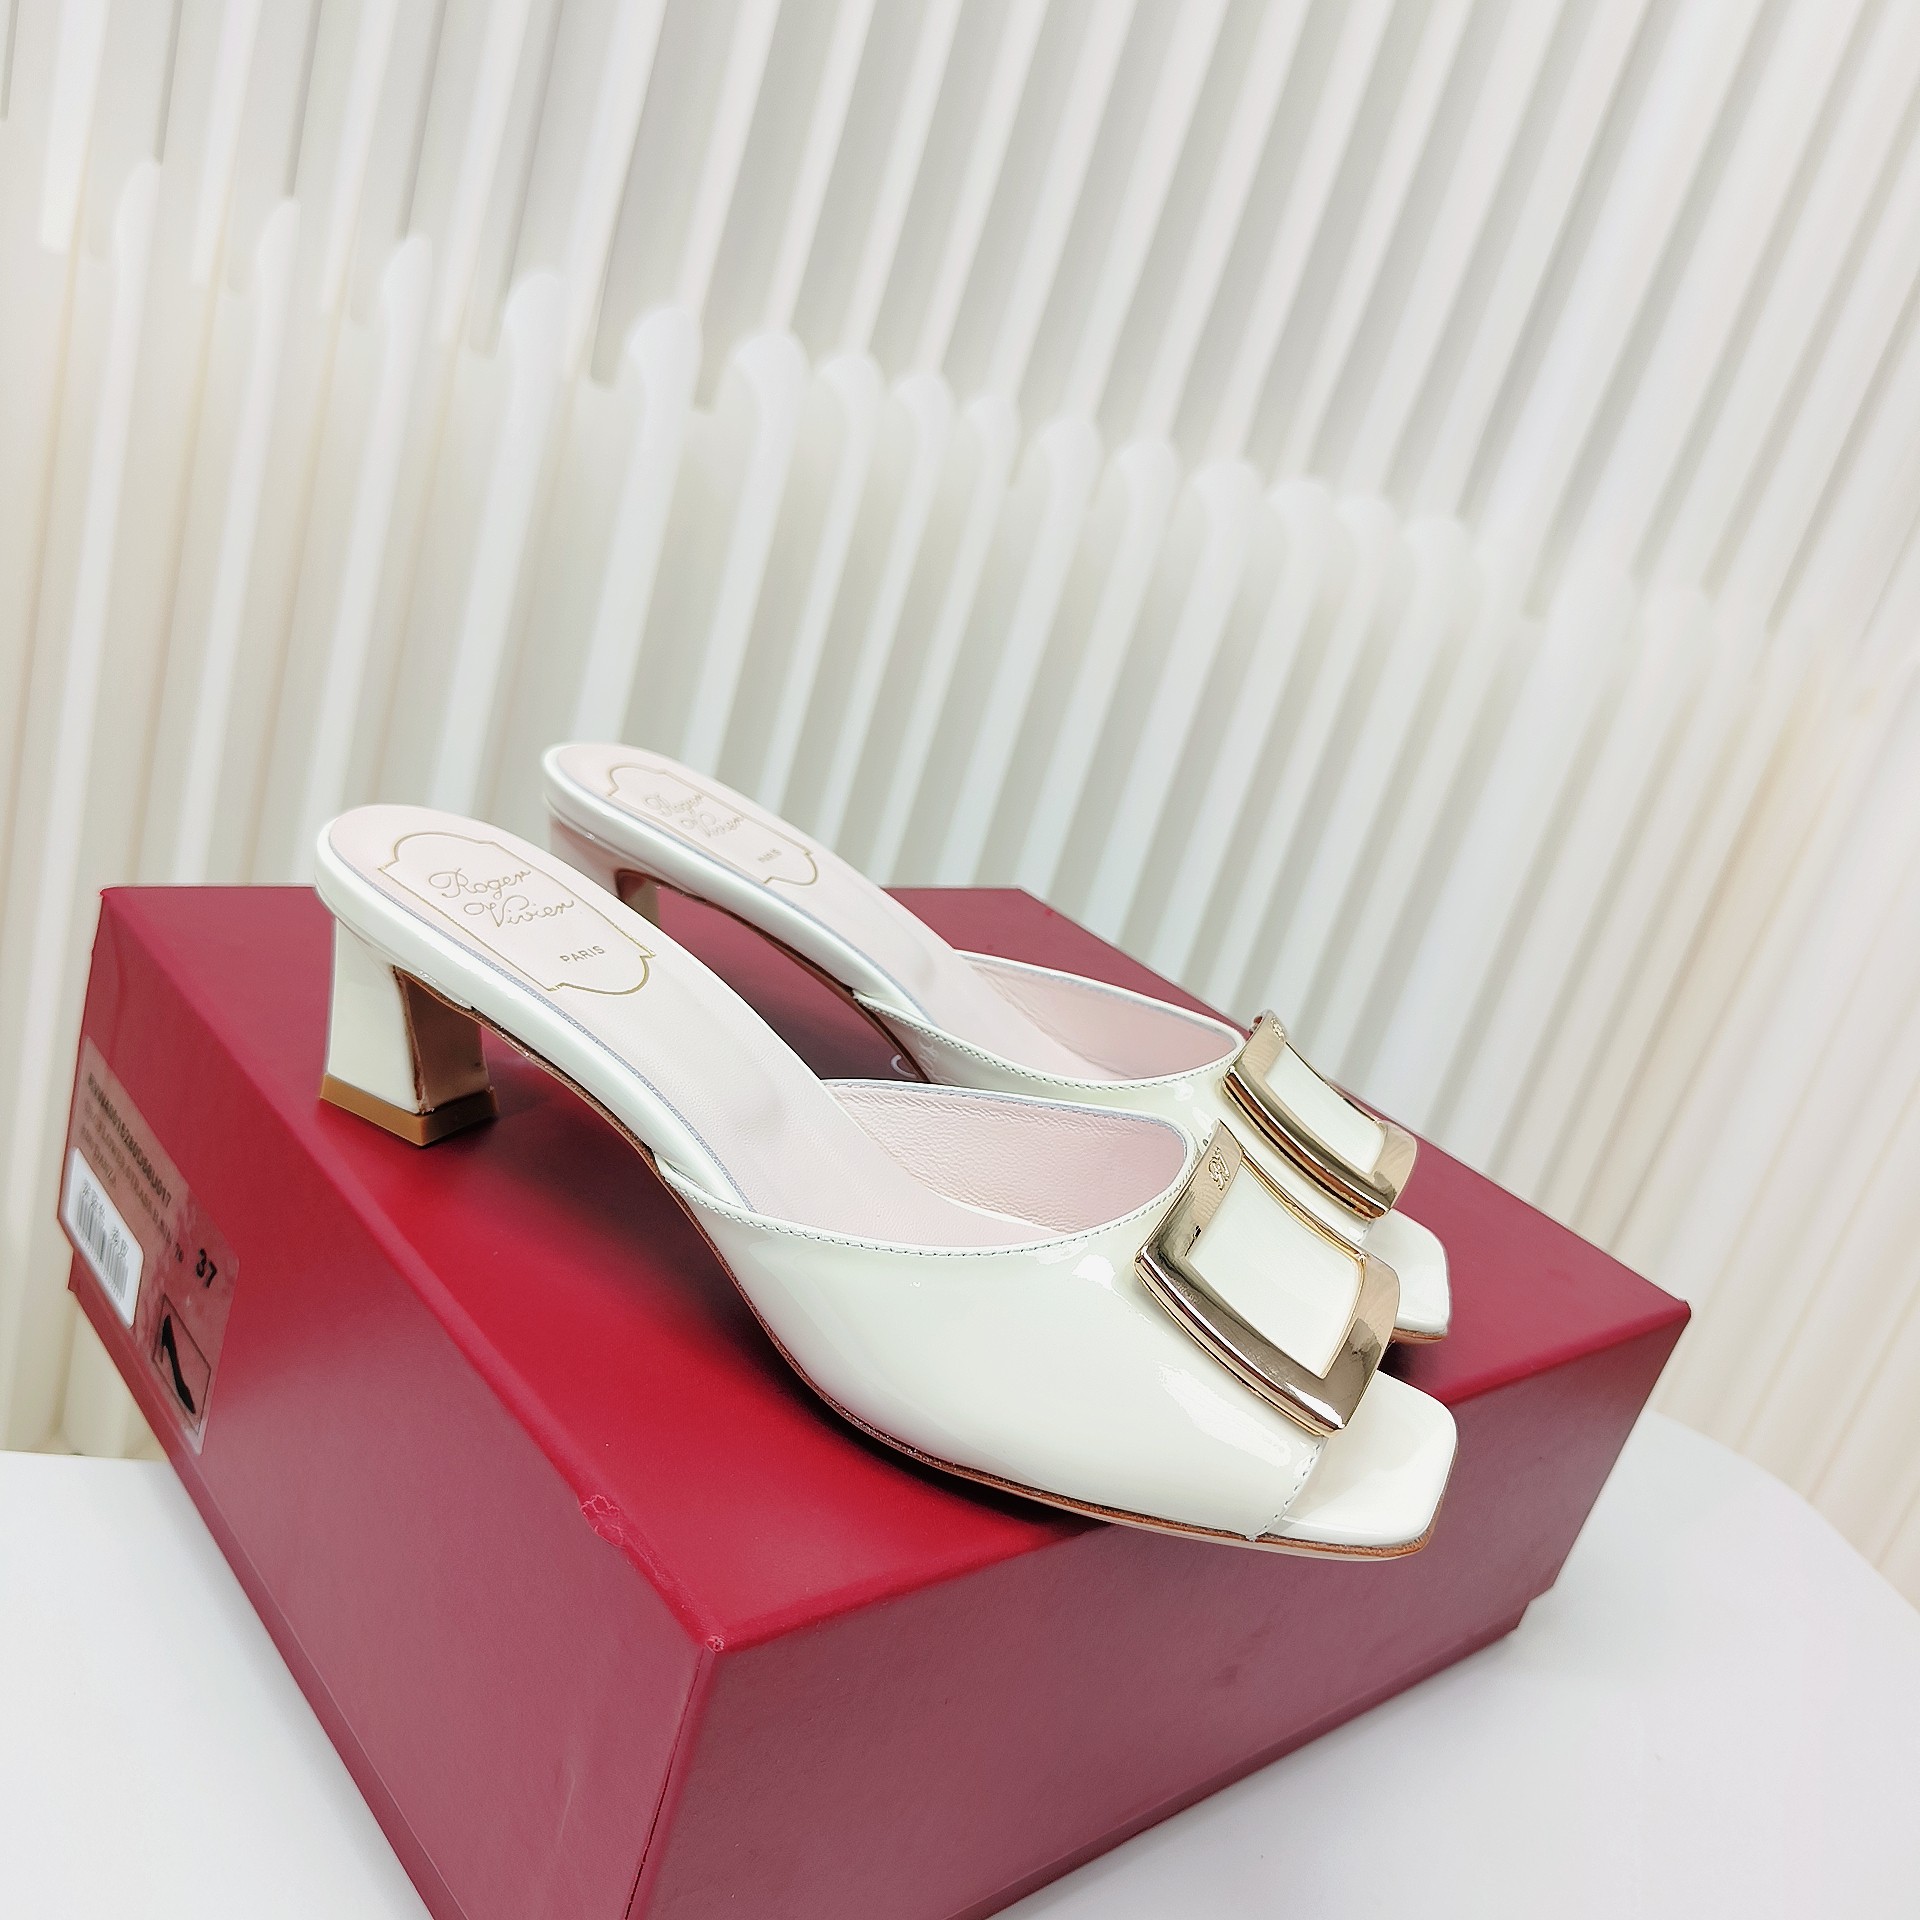 Roger Vivier Shoes Slippers Patent Leather Summer Collection